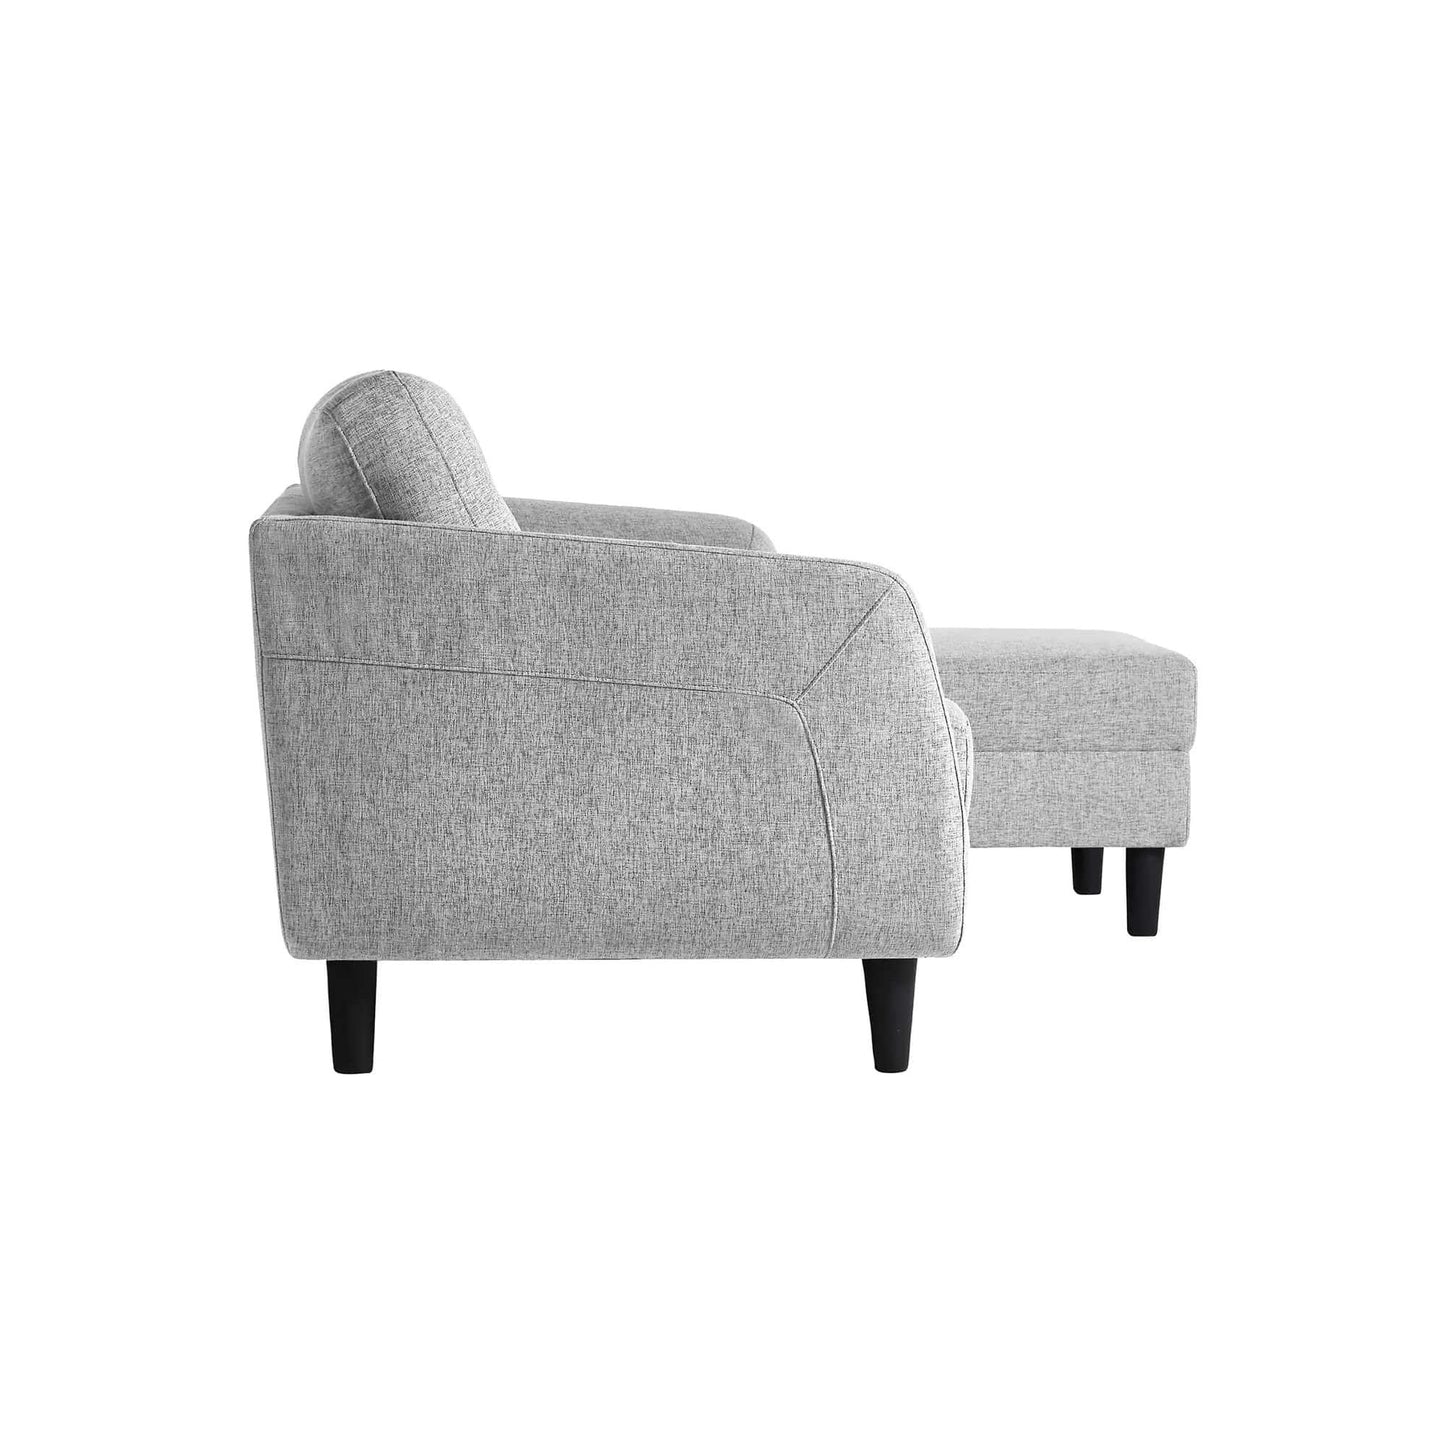 Belagio Sofa Bed With Chaise in Light Gray